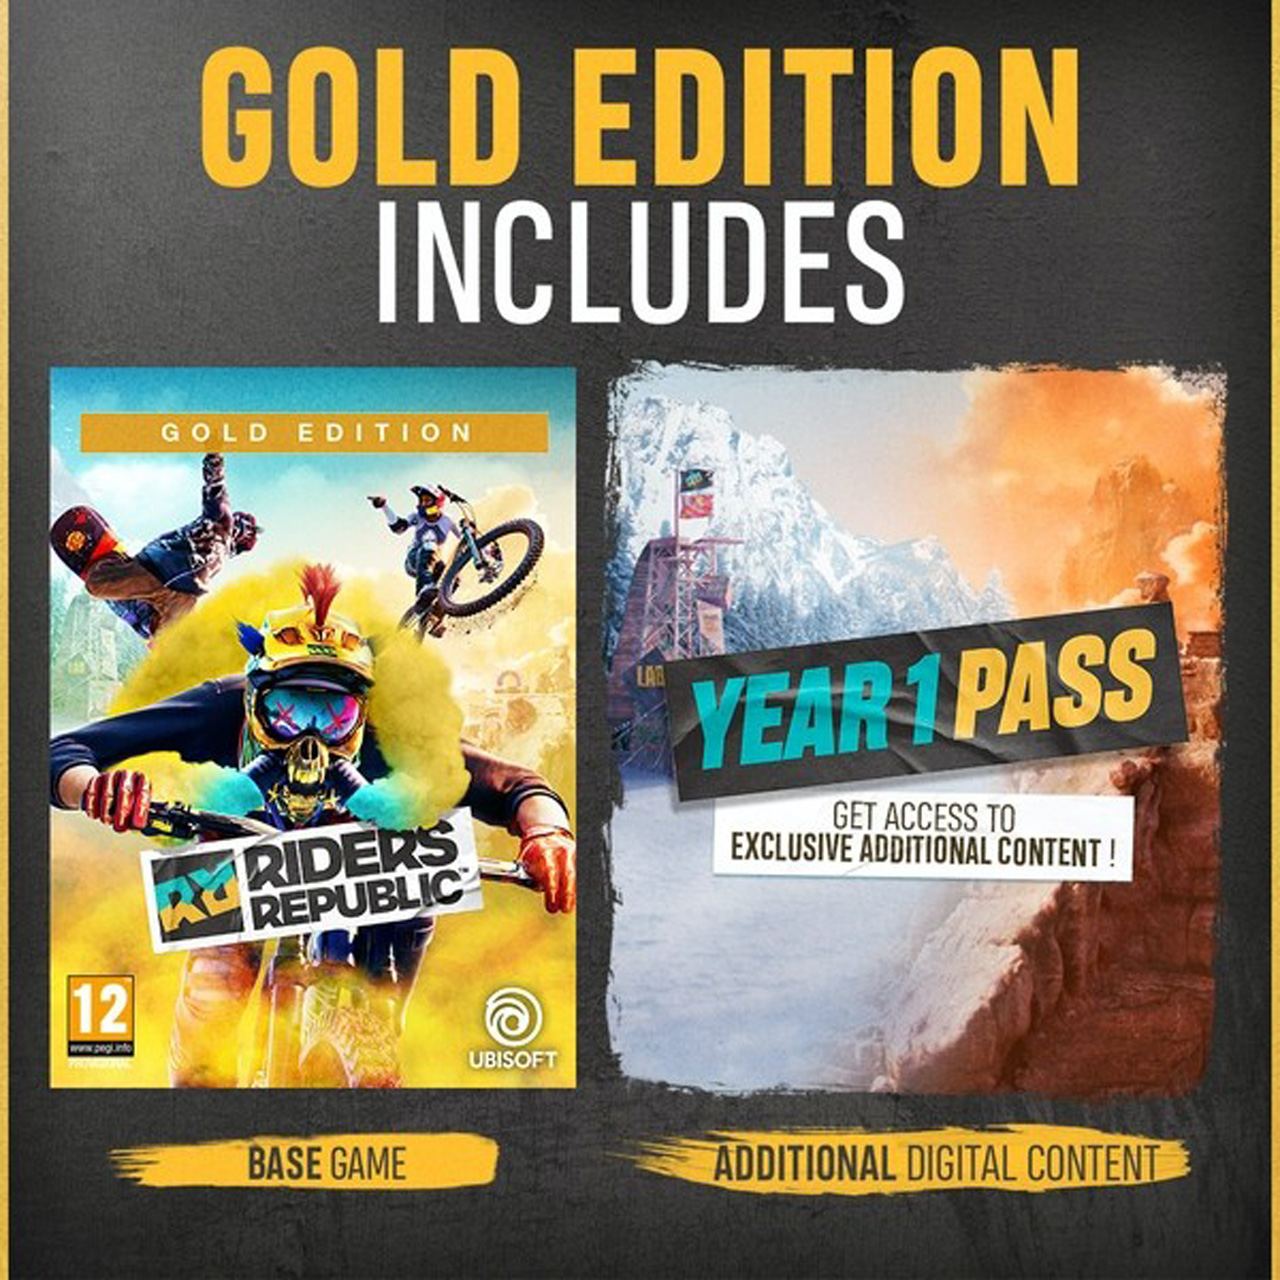 Riders Republic [Gold Edition] for PlayStation 4